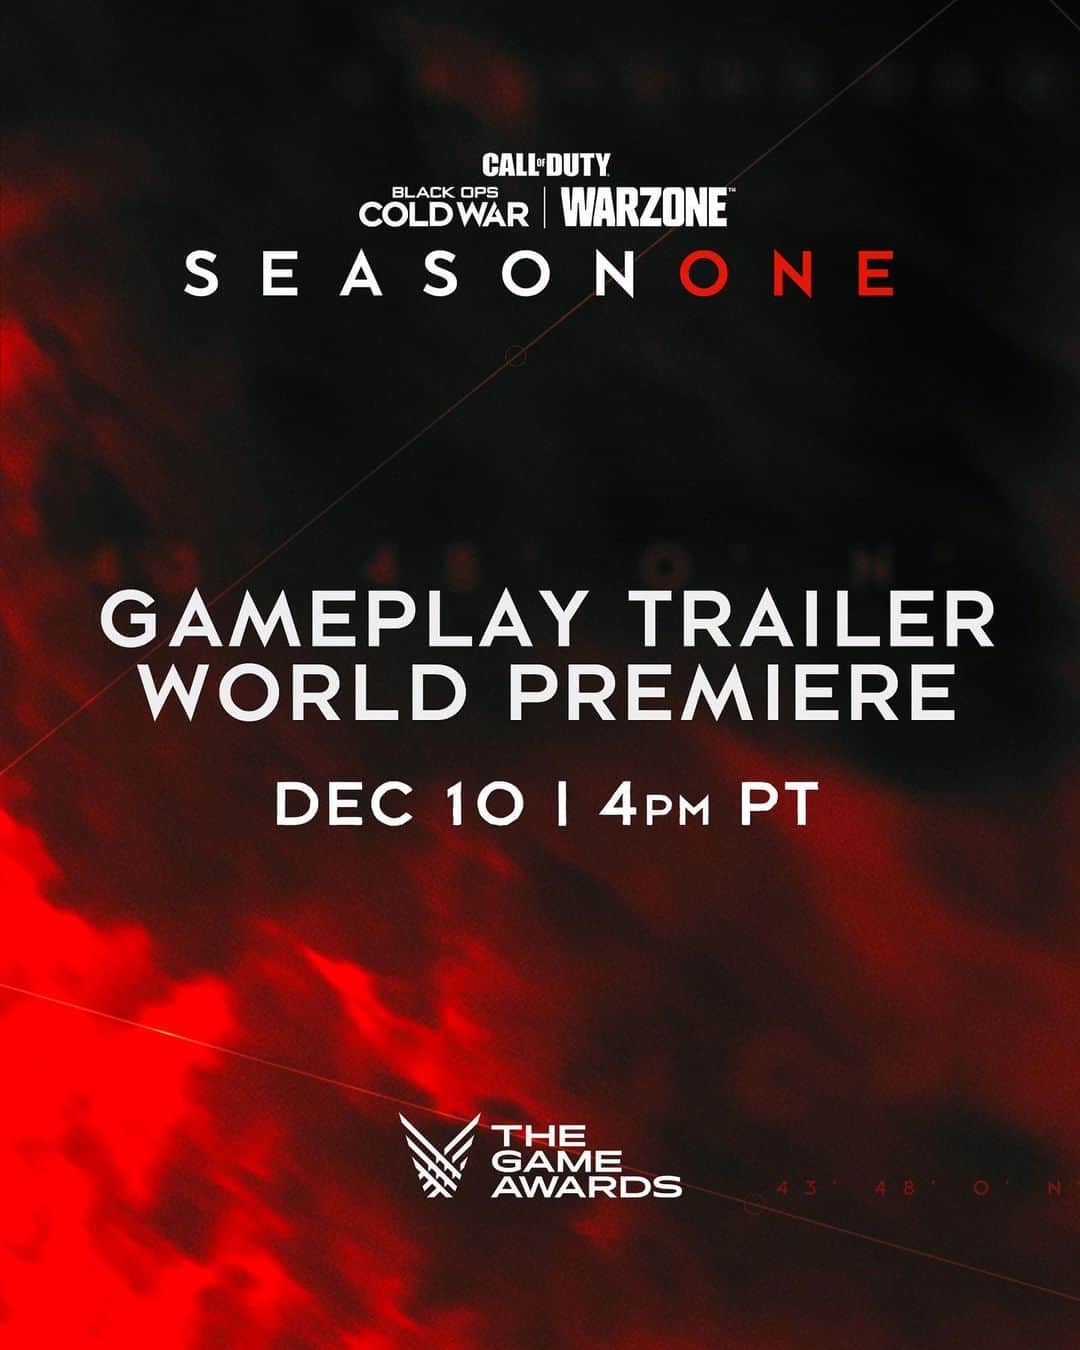 Call of Dutyのインスタグラム：「See it first.  Tune-in to @thegameawards on December 10 at 4PM PT for the Gameplay Trailer World Premiere of Season One in #BlackOpsColdWar and #Warzone.」